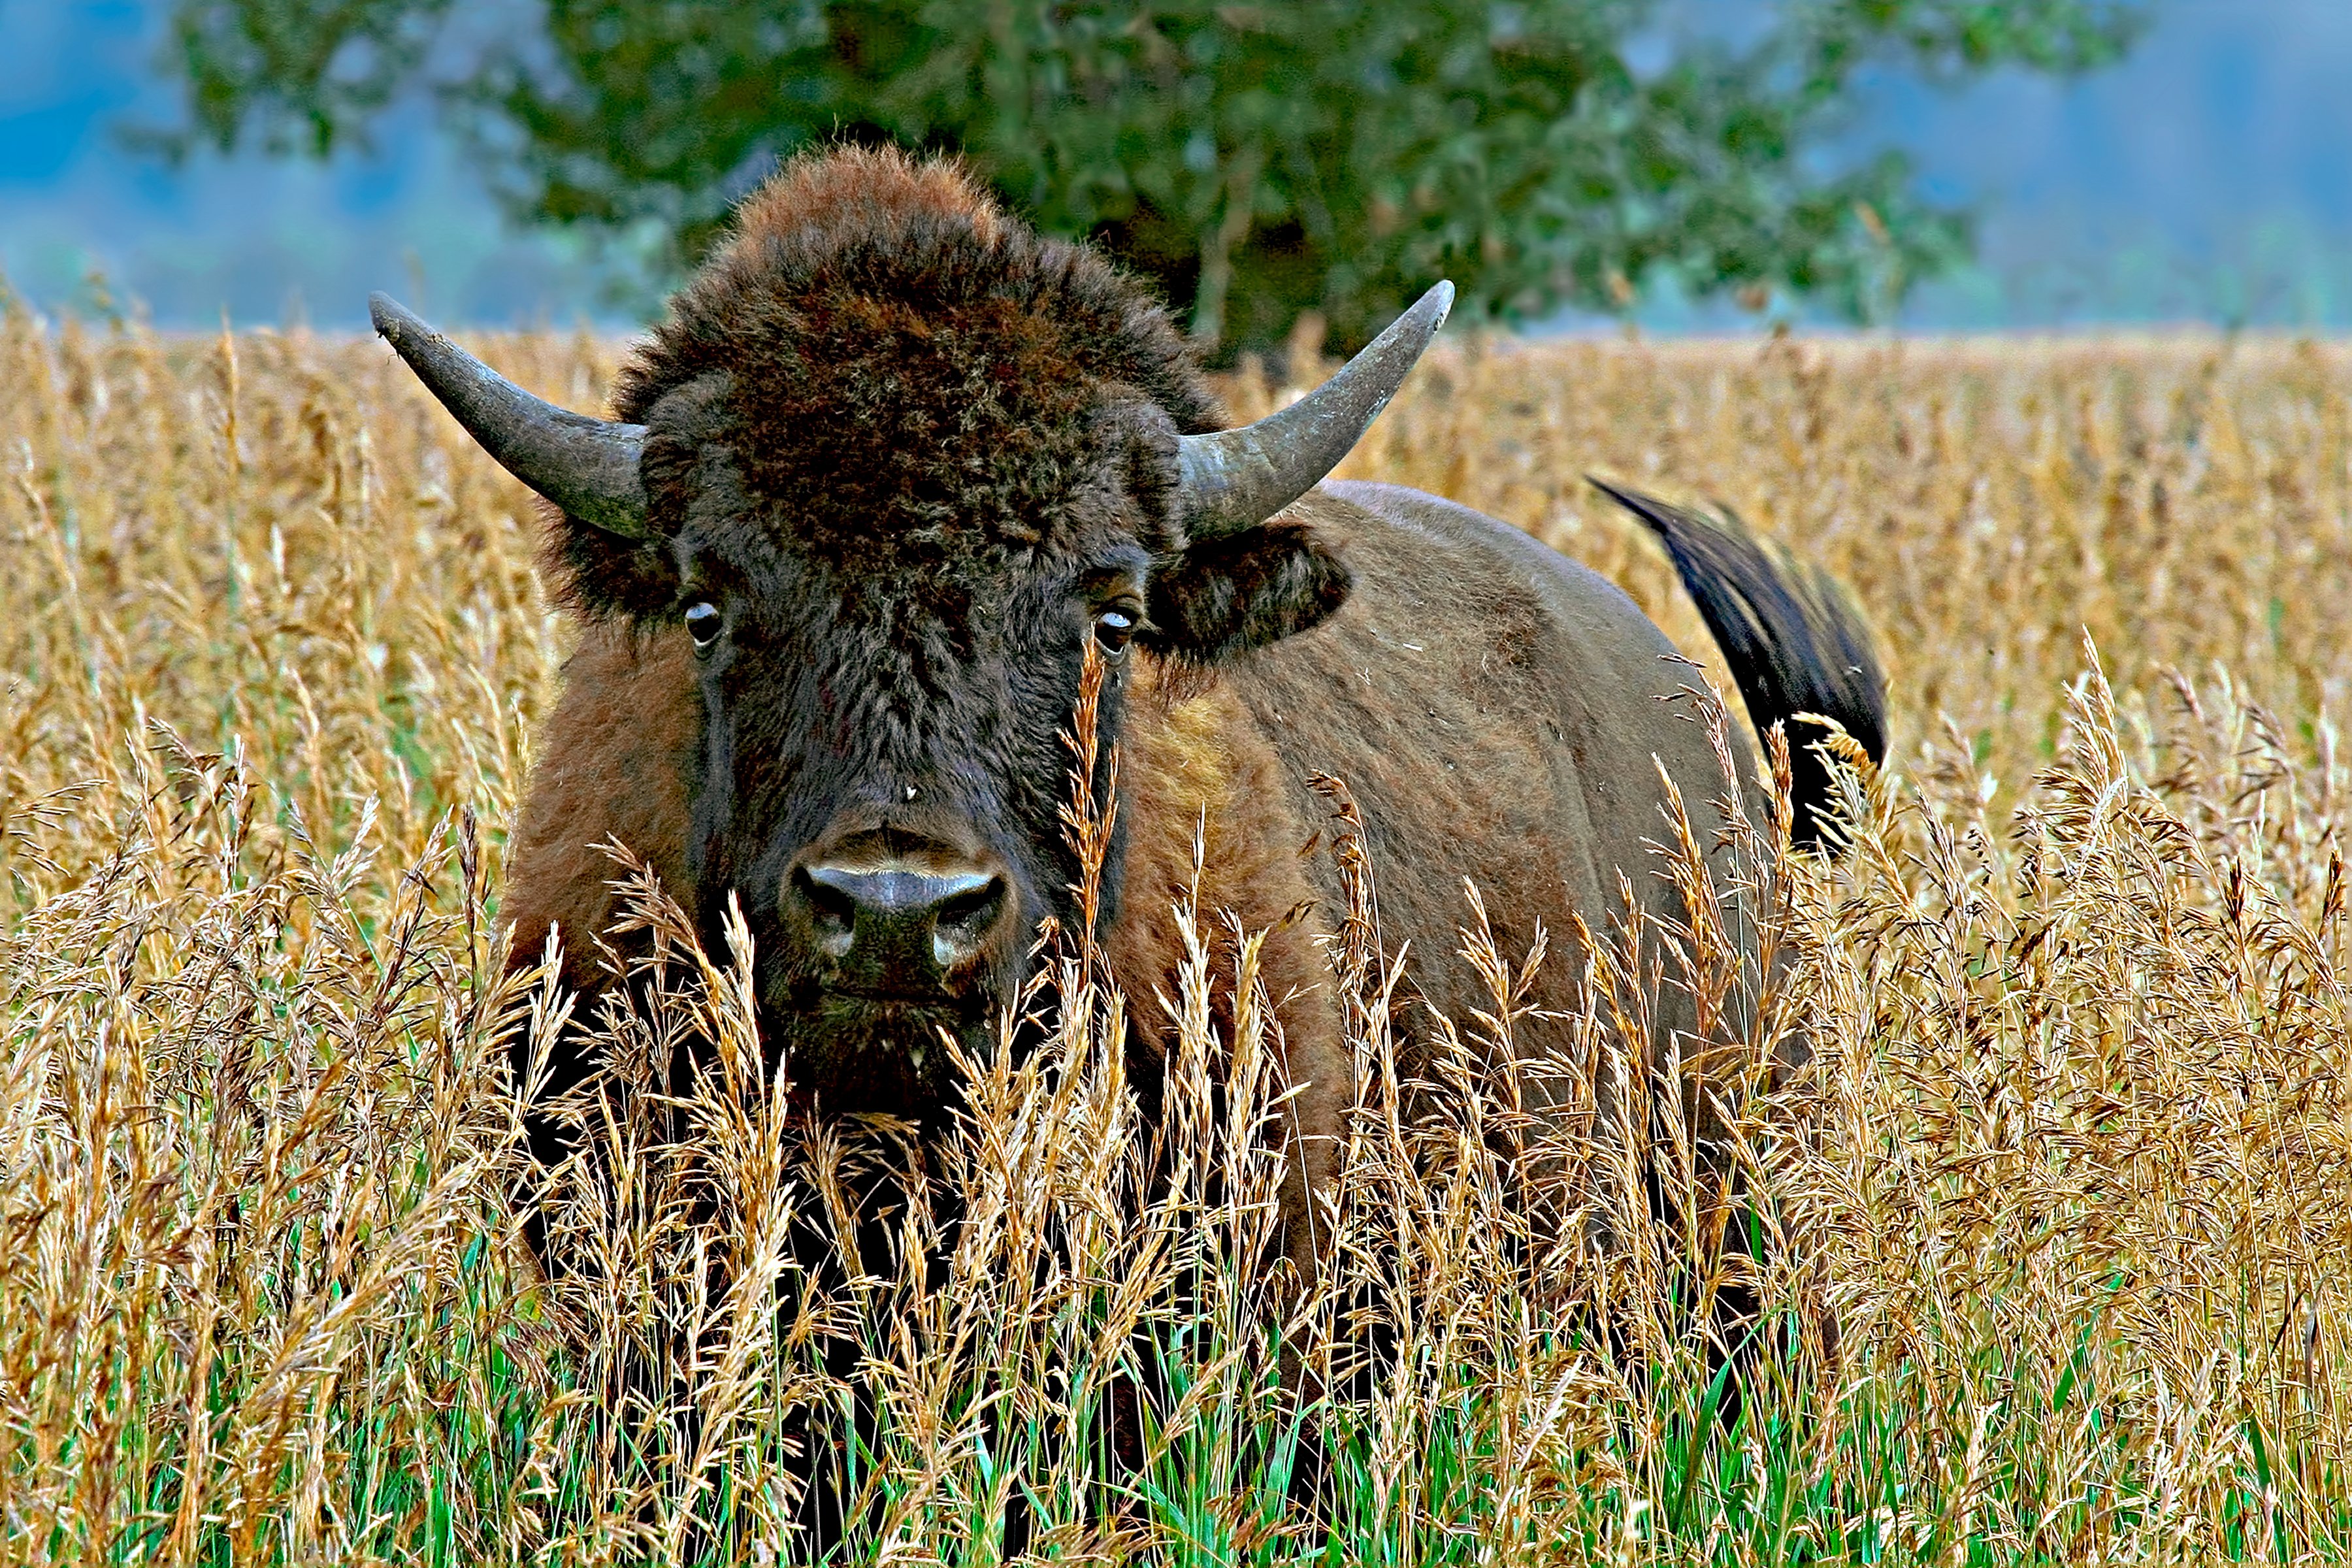 WHERE BUFFALO ROAM - We were in Wyoming when this fella crossed the road about 50 yards ahead of us. I stopped and got out of my car. He didn't take his eyes off me. If I took a step, he took a step back. We watched each other about half a minute before he turned and ran.